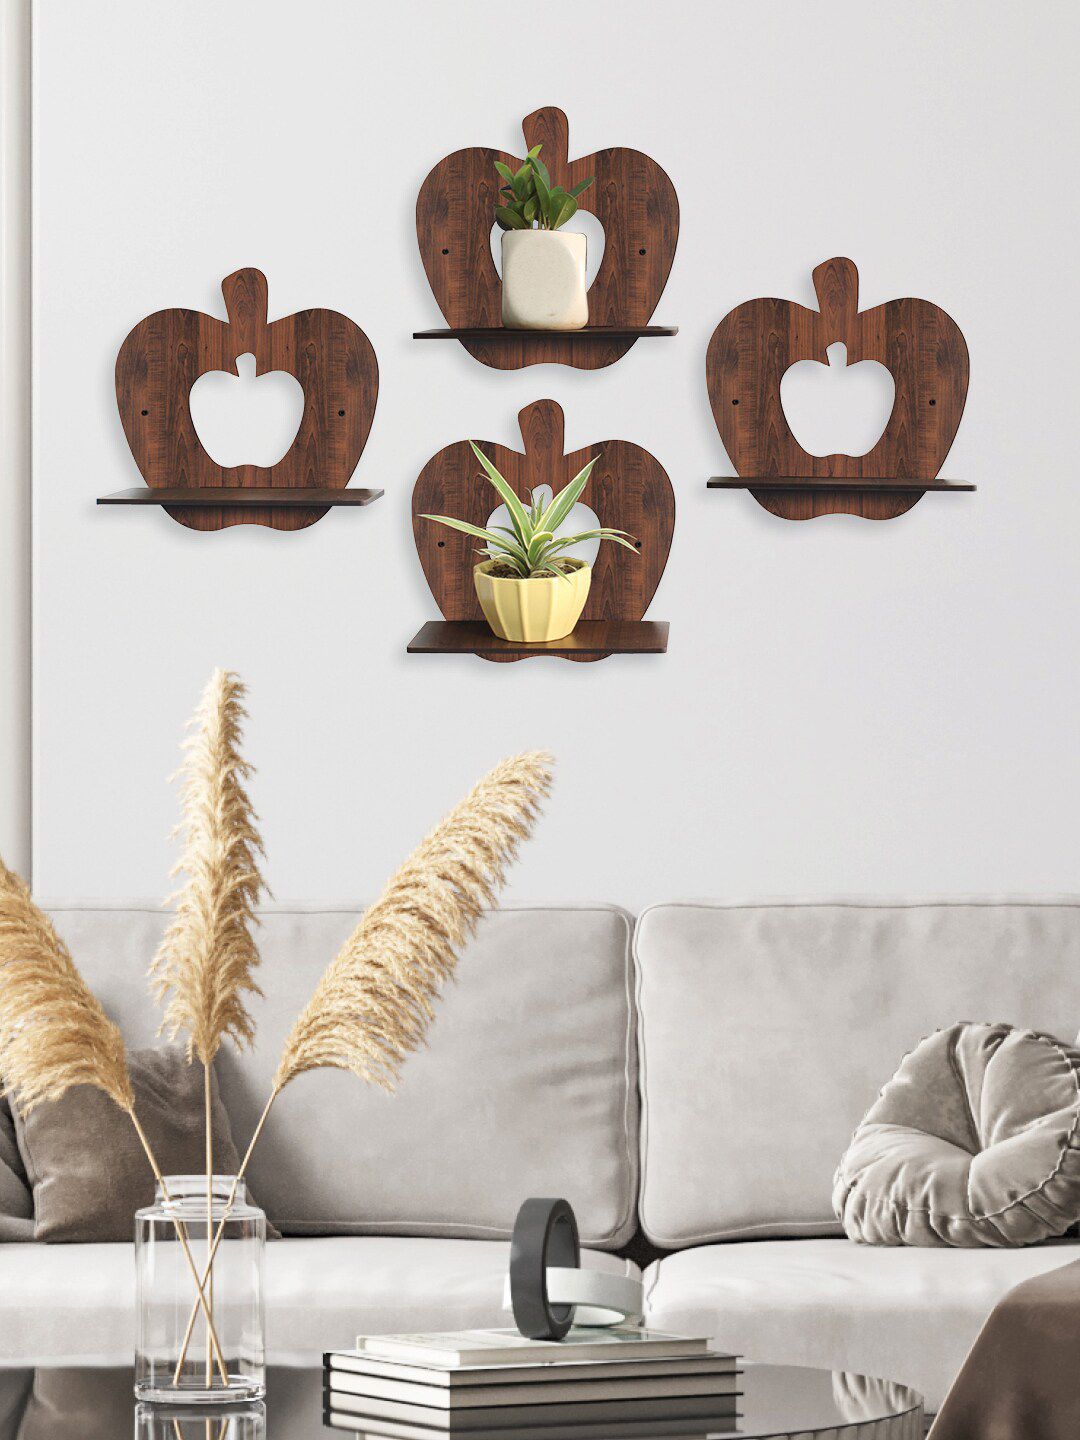 RANDOM Set Of 4 Brown Apple Wall Hanging Laminated Planters Price in India